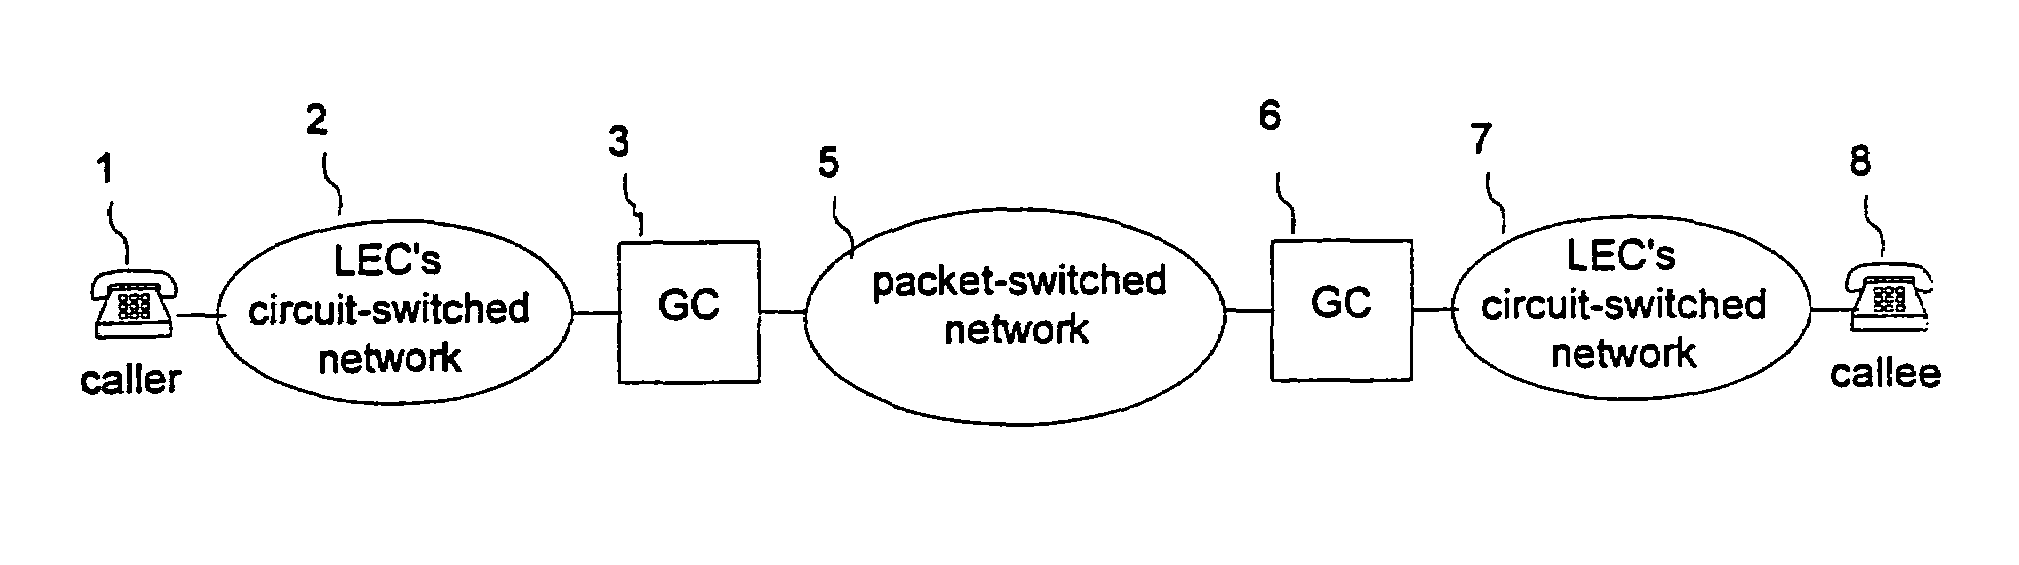 Hybrid packet-switched and circuit-switched telephony system